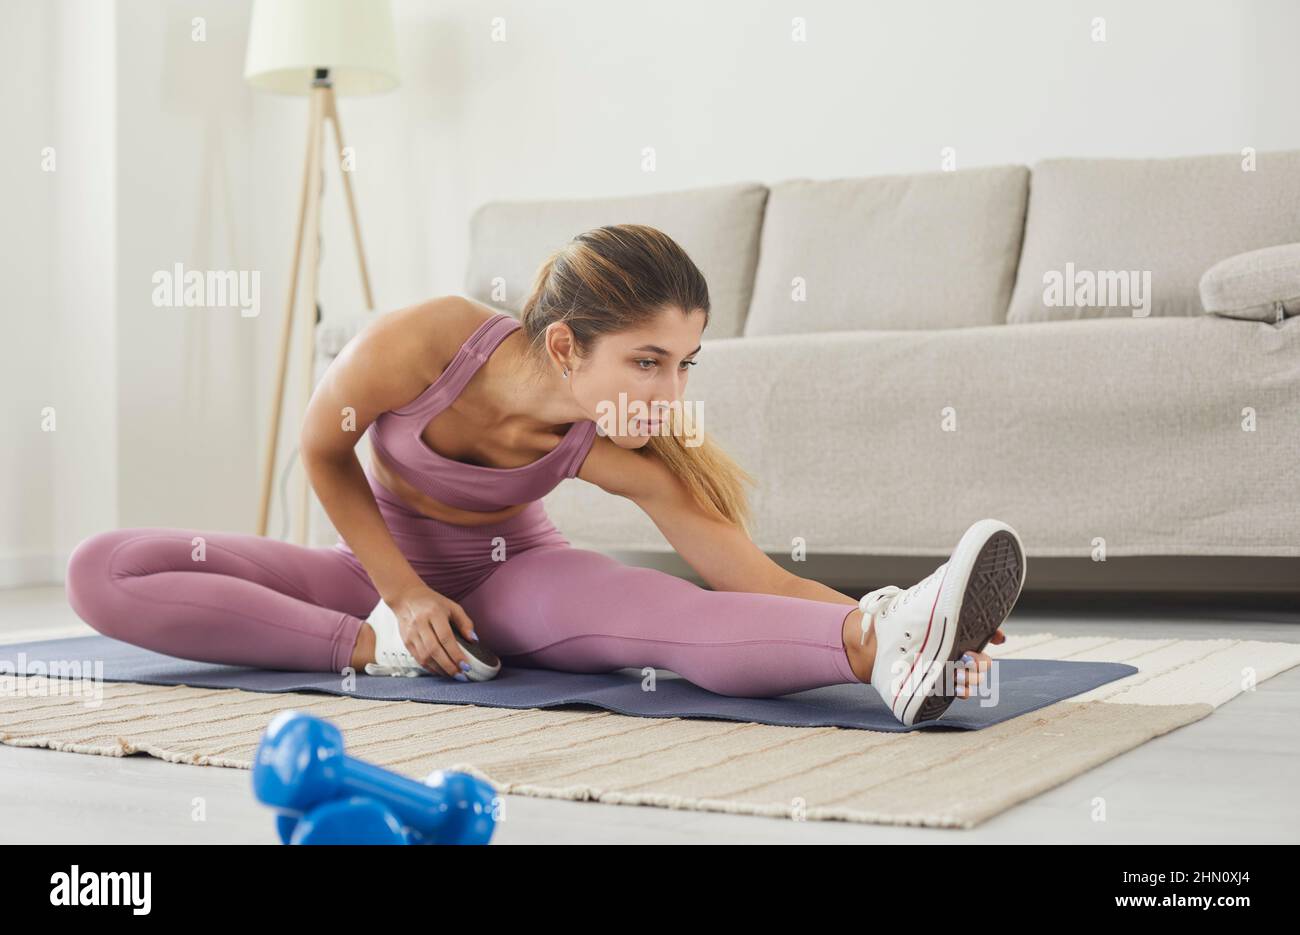 Woman with high body flexibility stretching her leg to warm up doing aerobics gymnastics exercises. Stock Photo